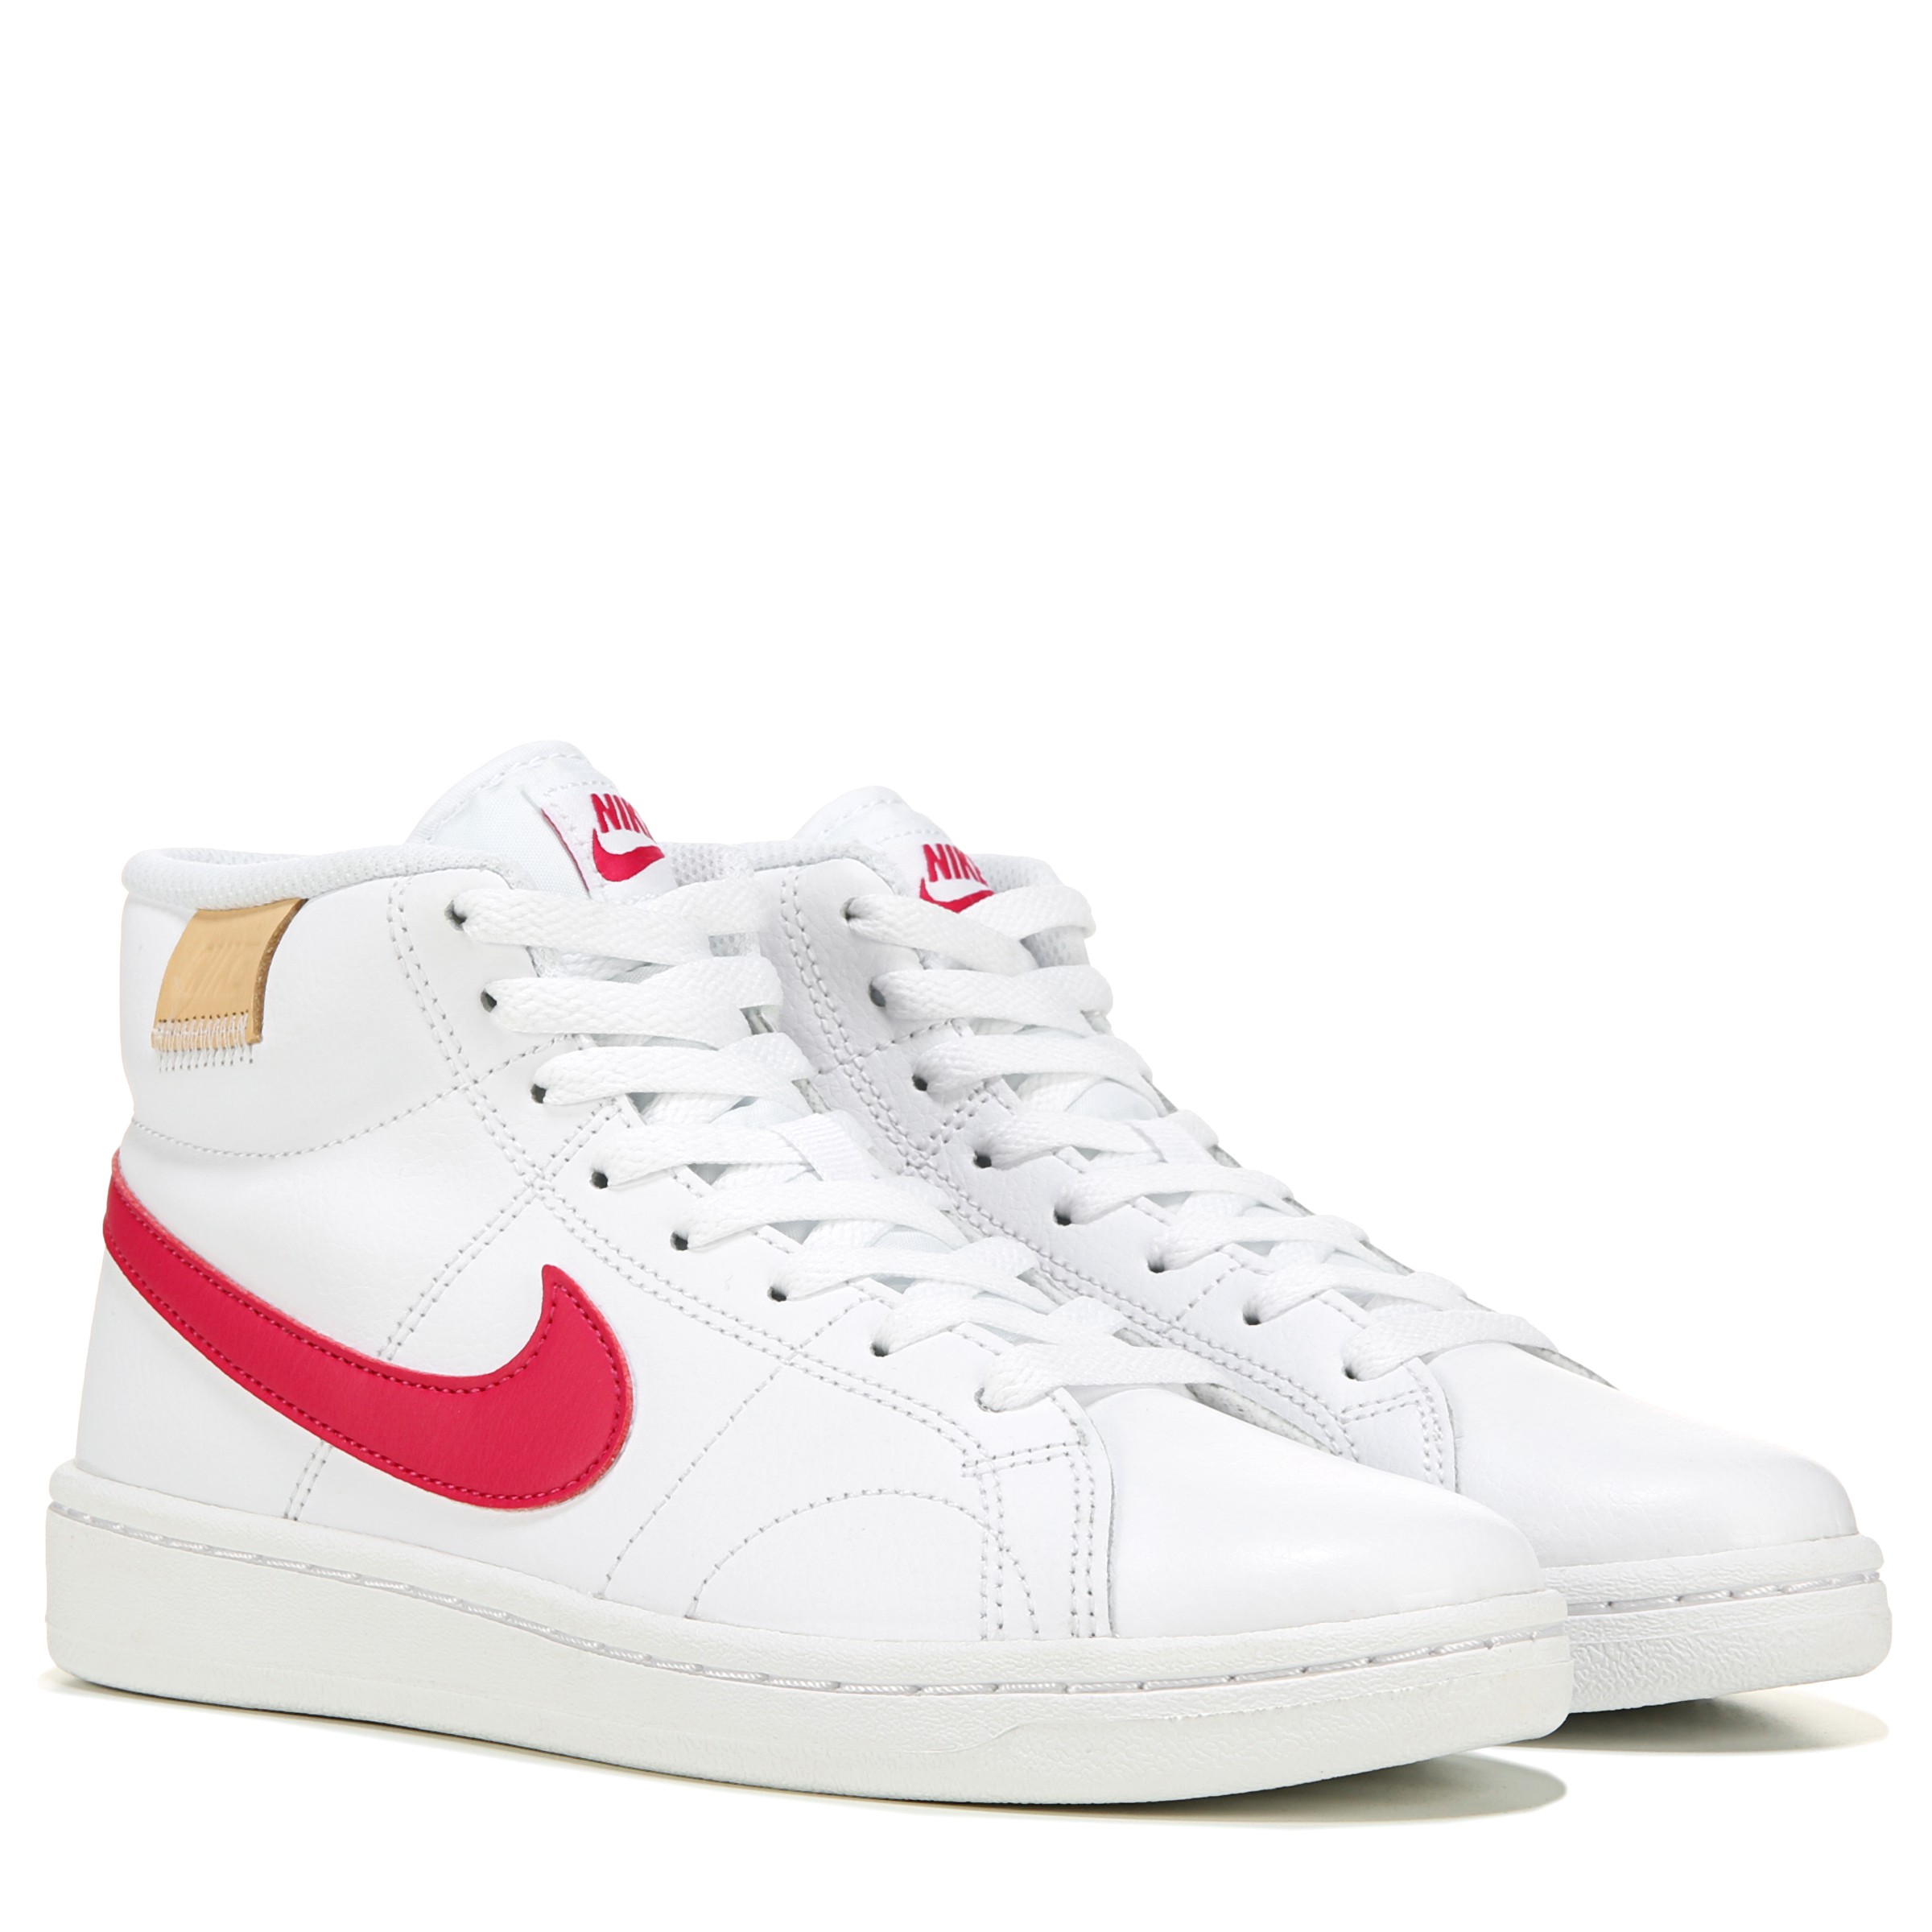 Court Royale 2 High Top Sneaker 